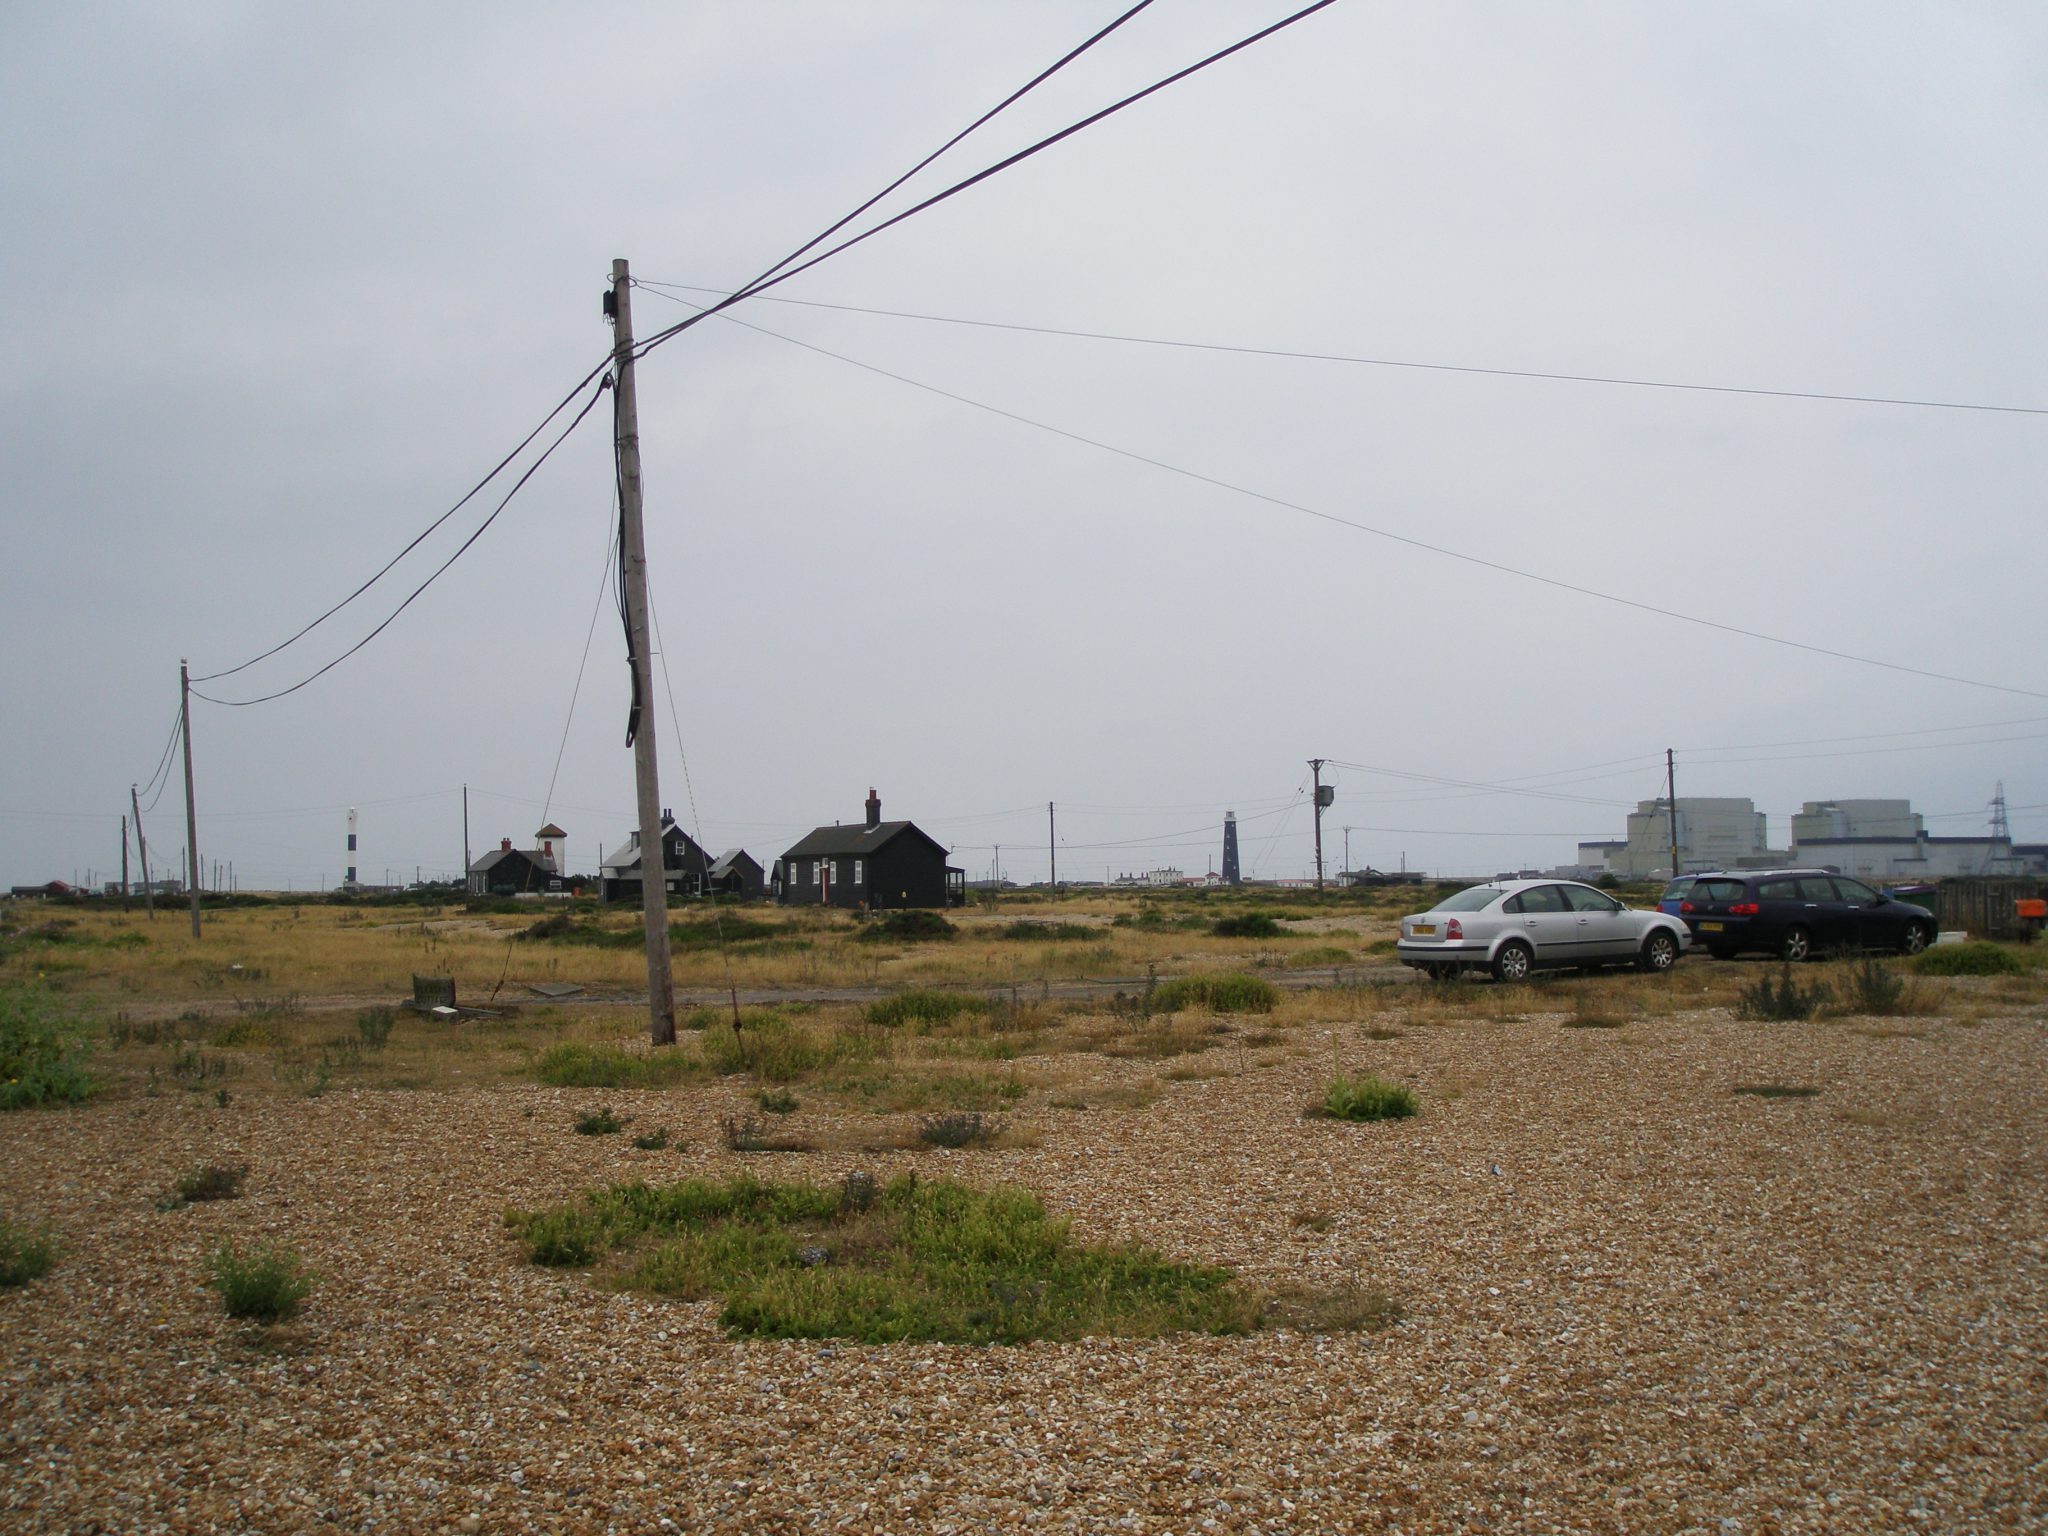 View from Prospect Cottage's garden or the Dungeness Nuclear Power Station, on August 7, 2013